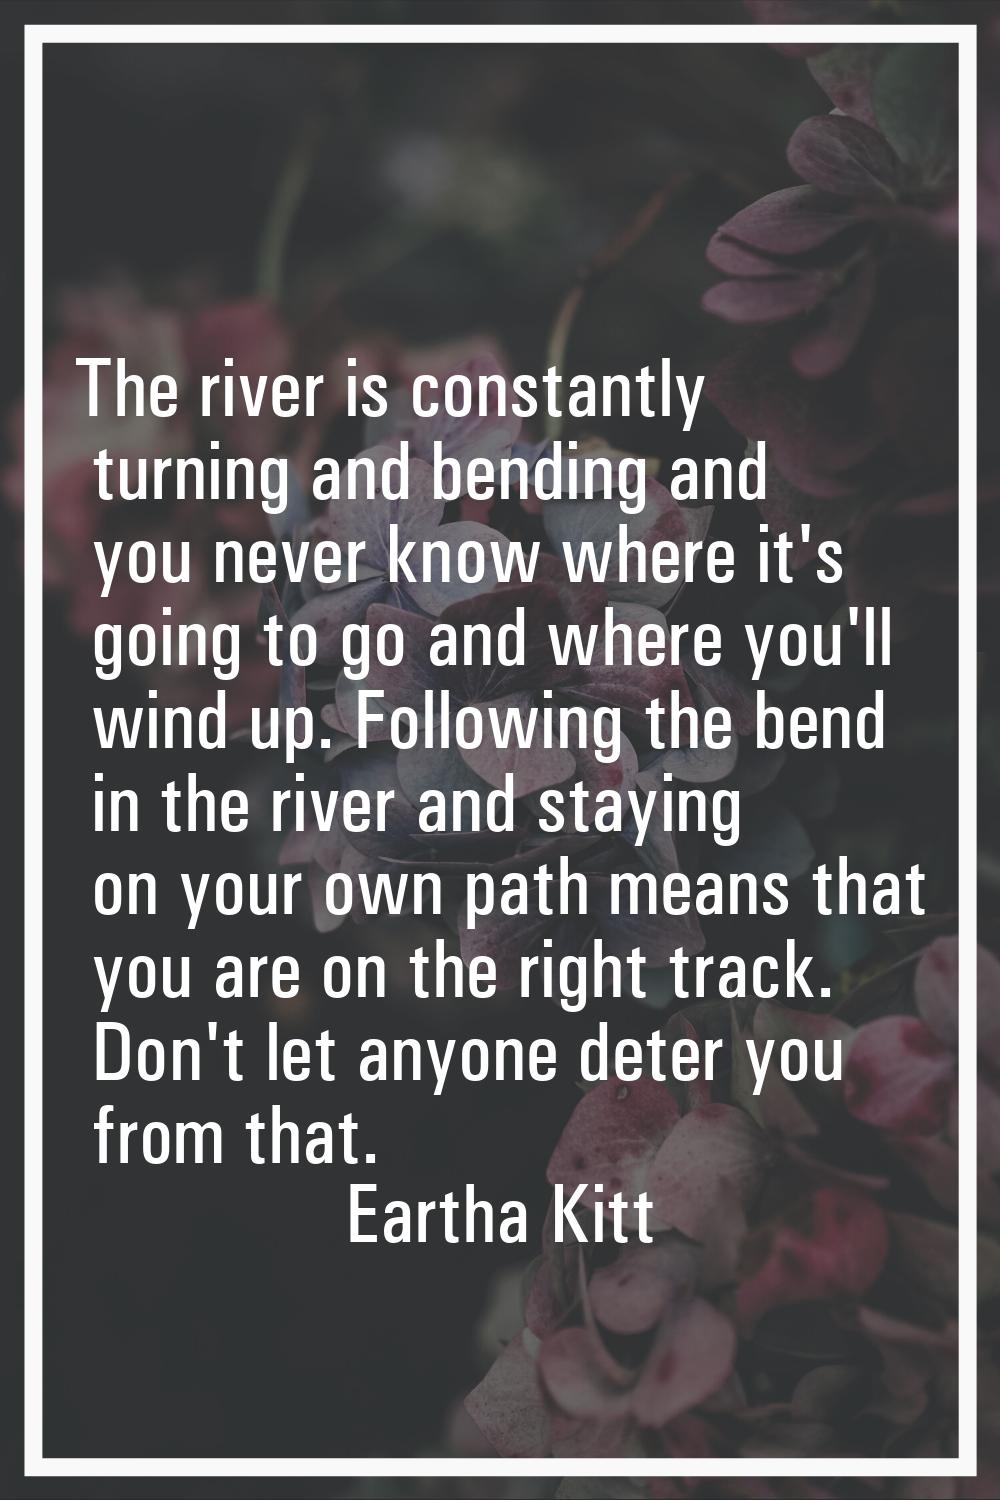 The river is constantly turning and bending and you never know where it's going to go and where you